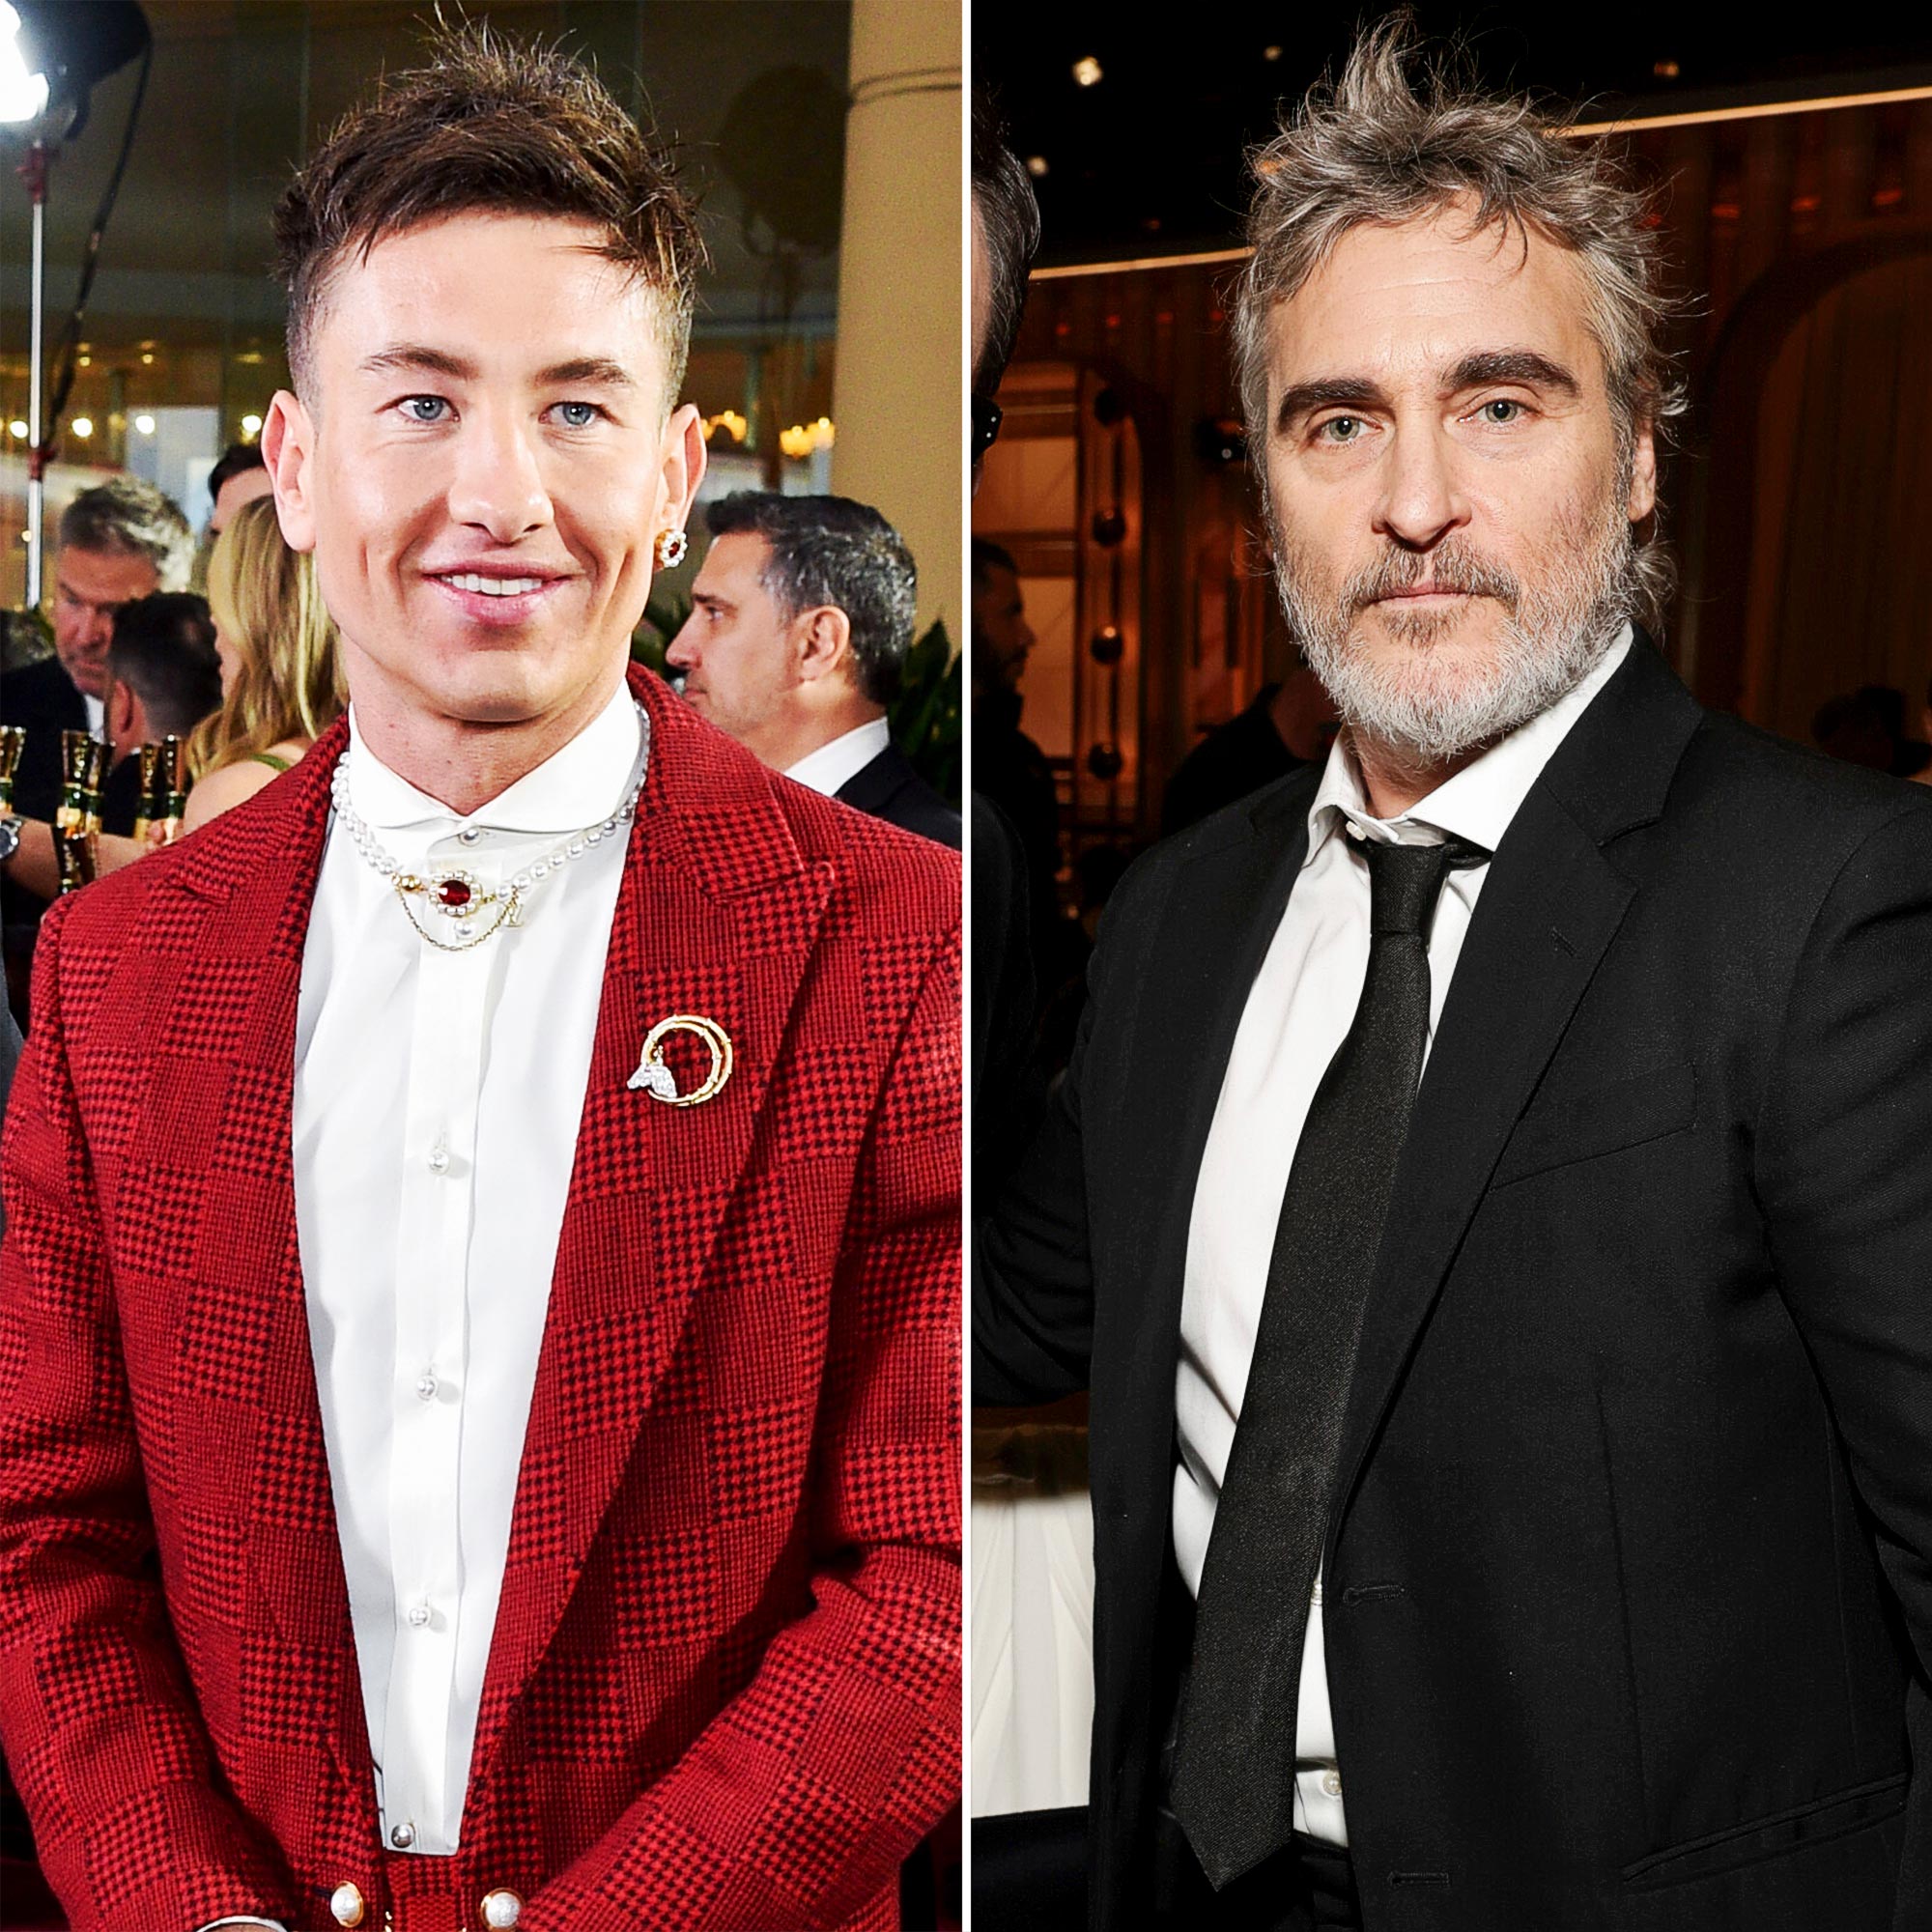 Barry Keoghan Shares a Memorable Moment with Joaquin Phoenix at the